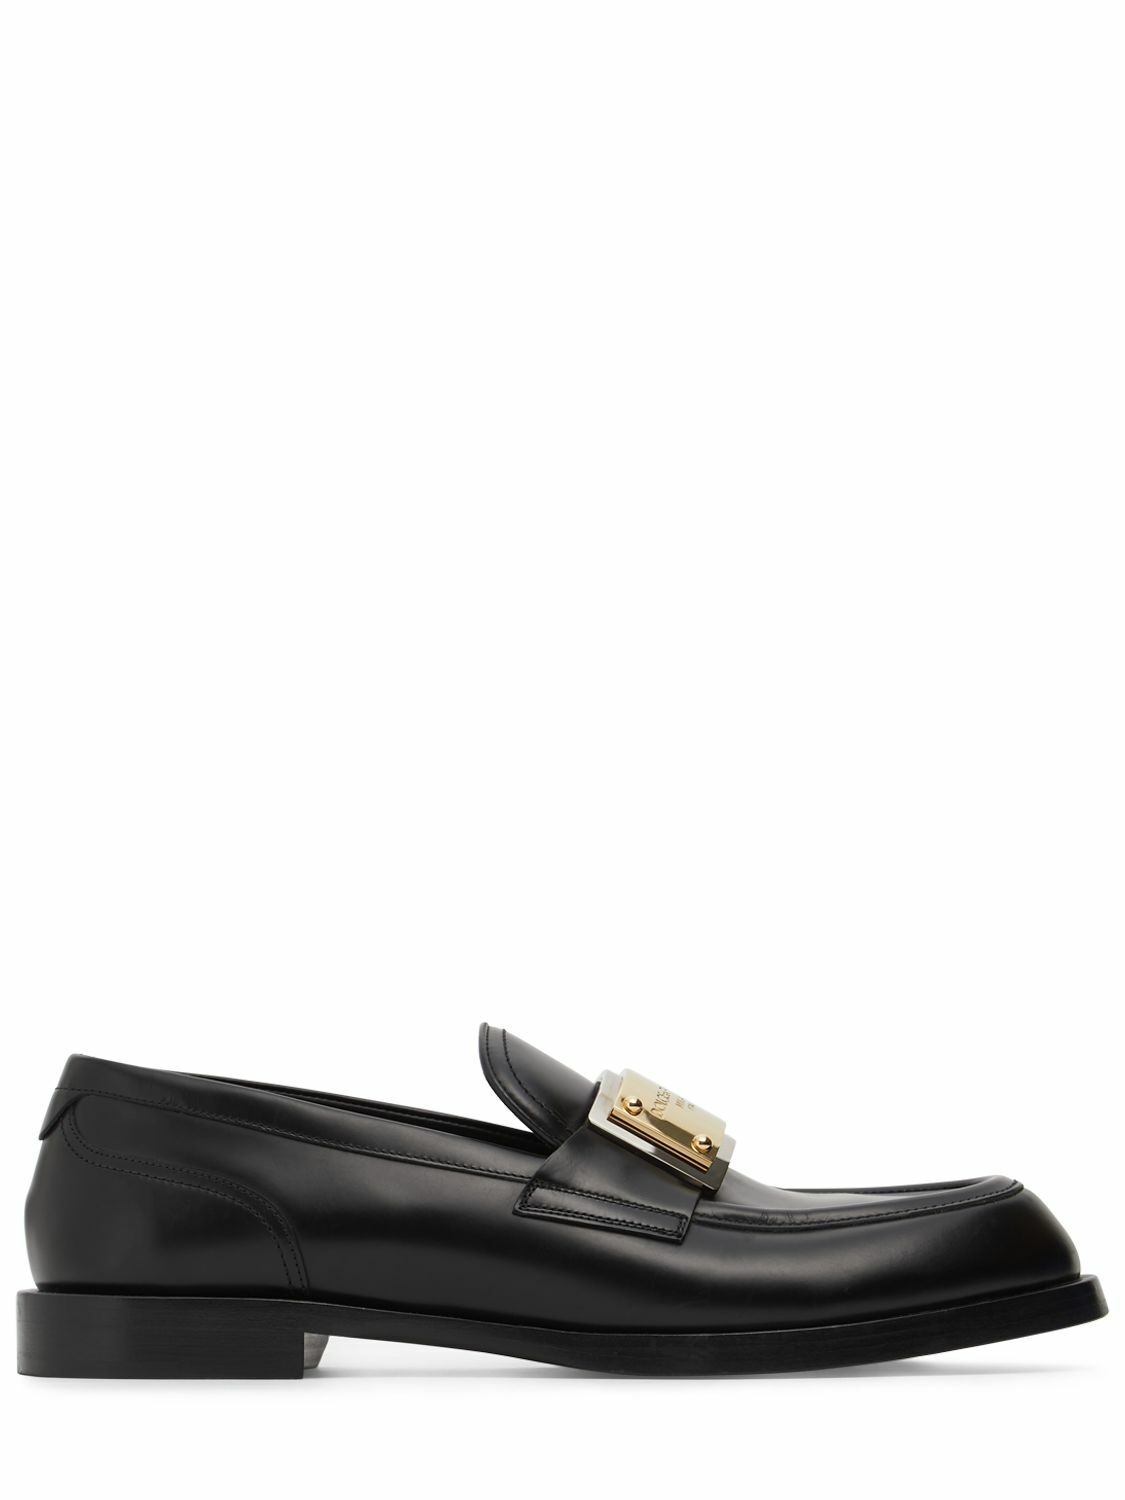 Photo: DOLCE & GABBANA - Plaqued Leather Loafers